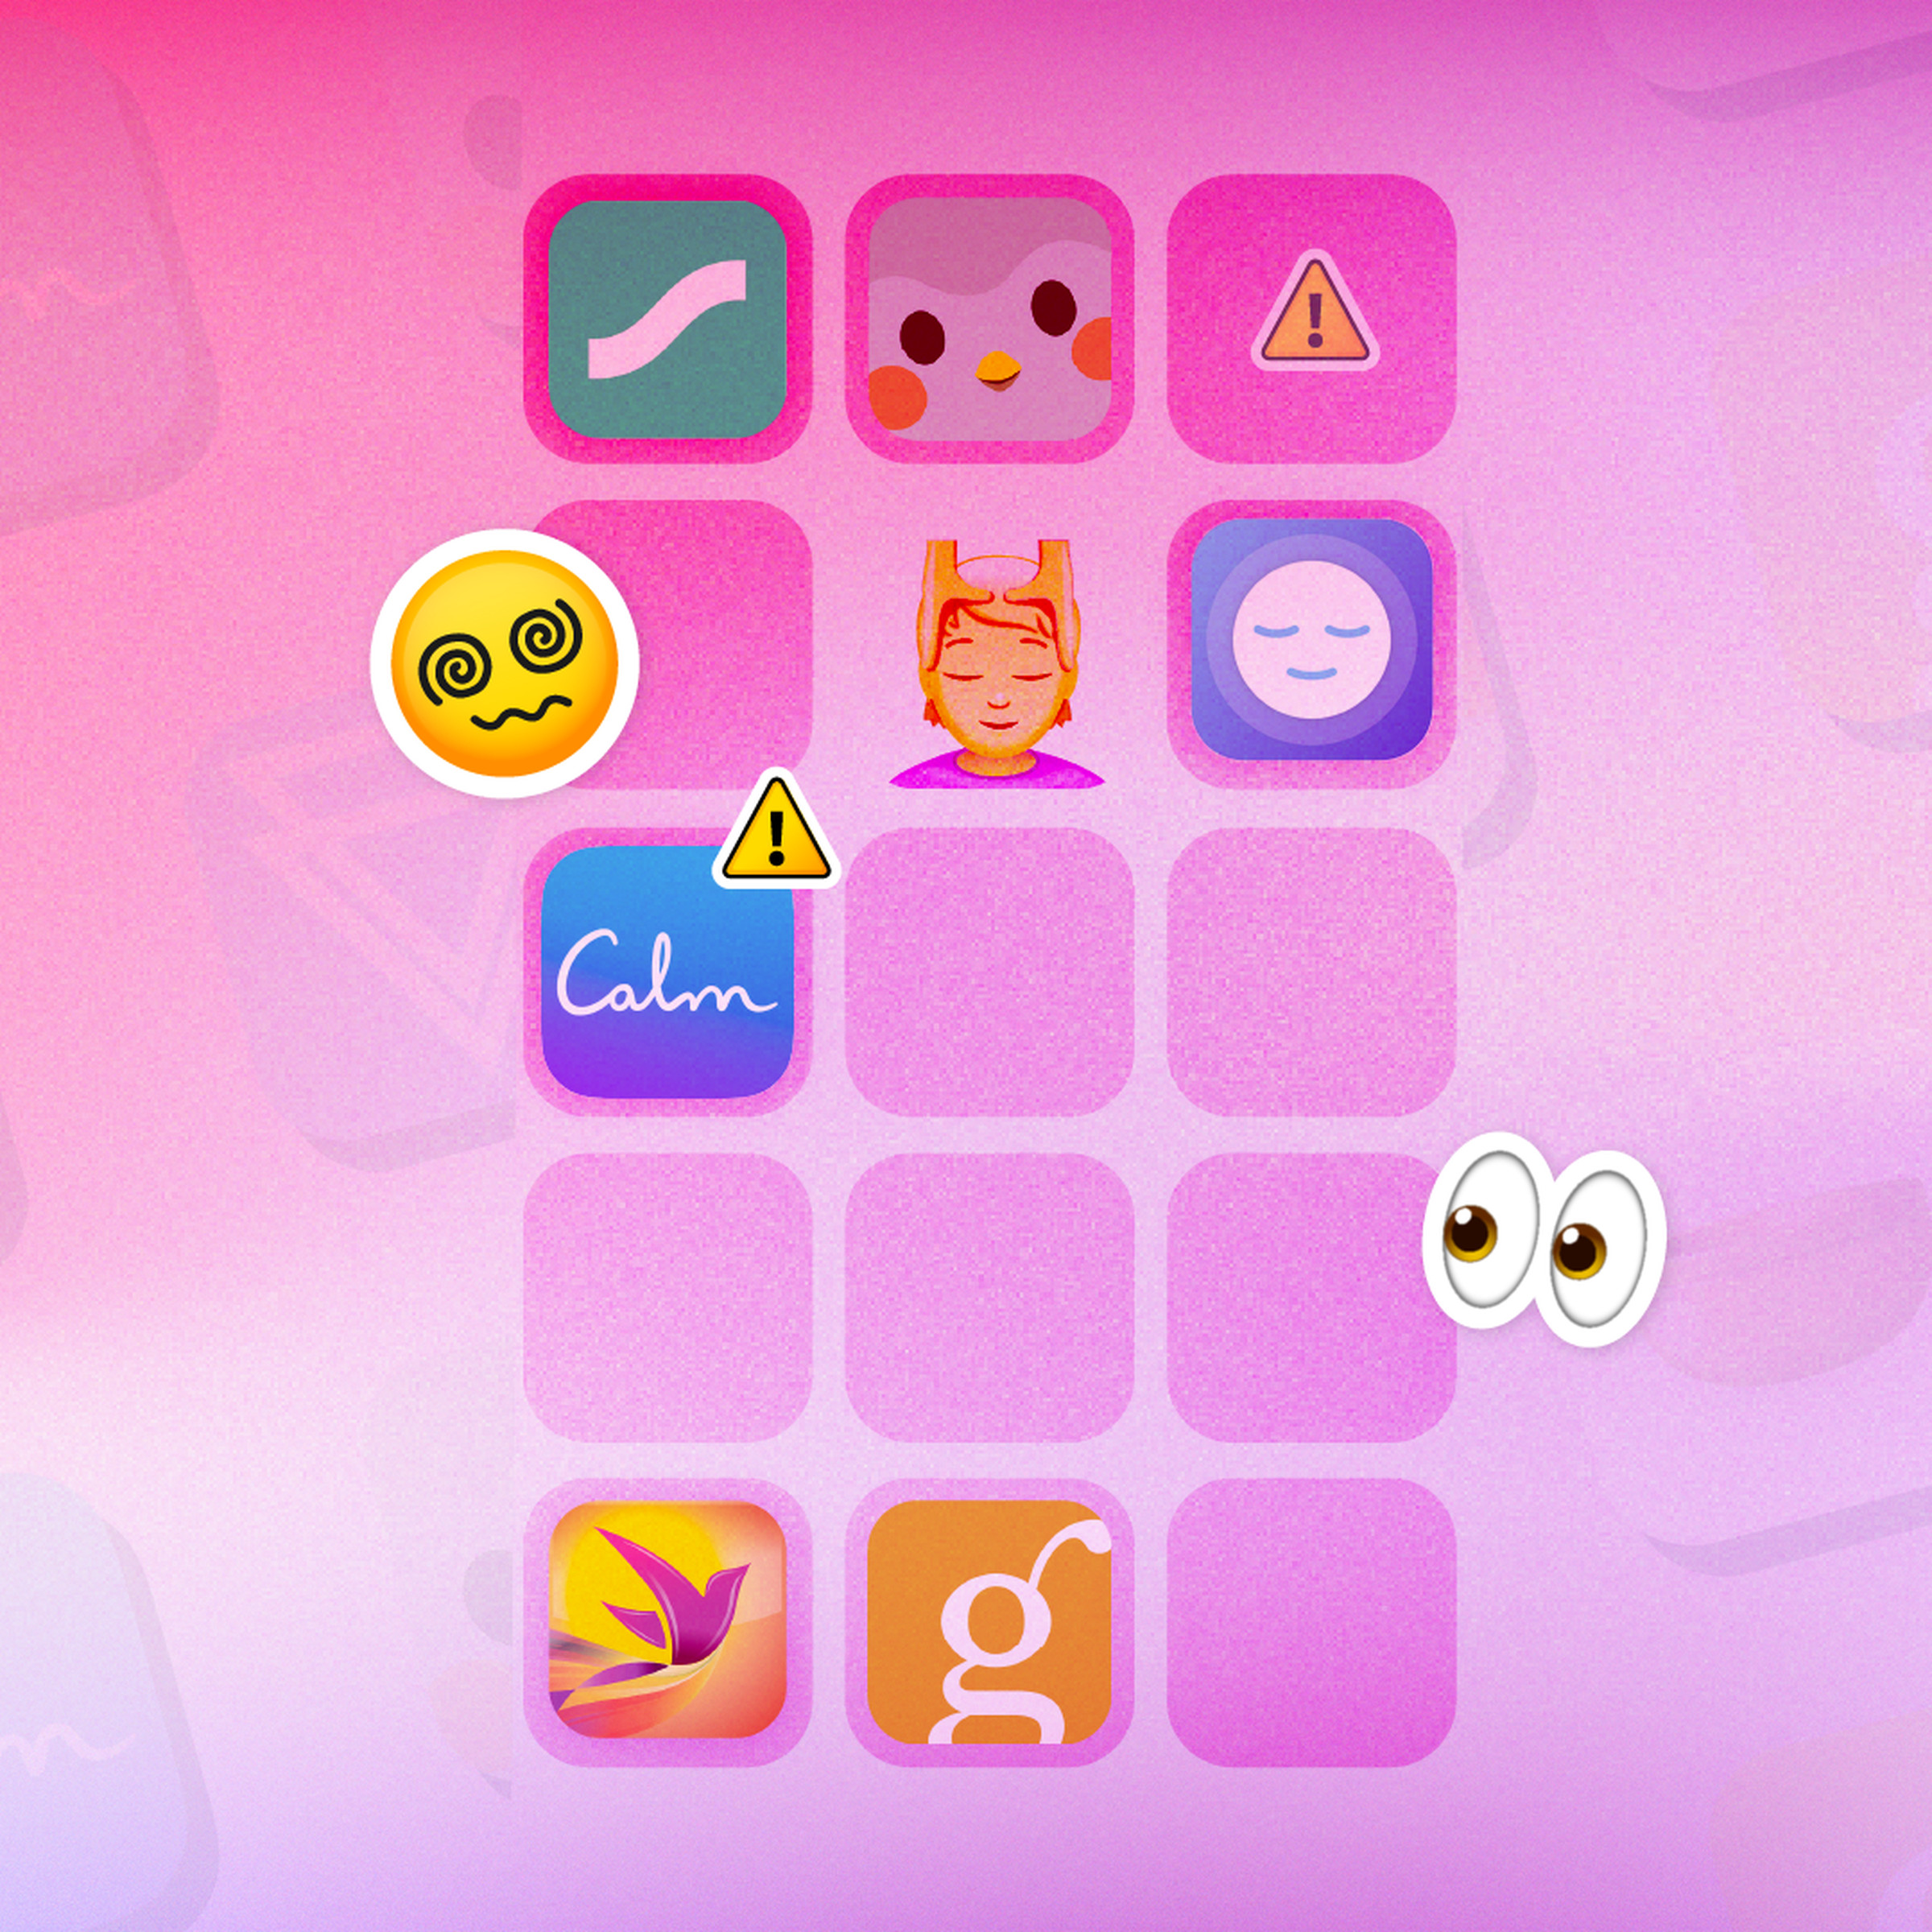 A selection of emojis and icons for mental health apps against a pink background.